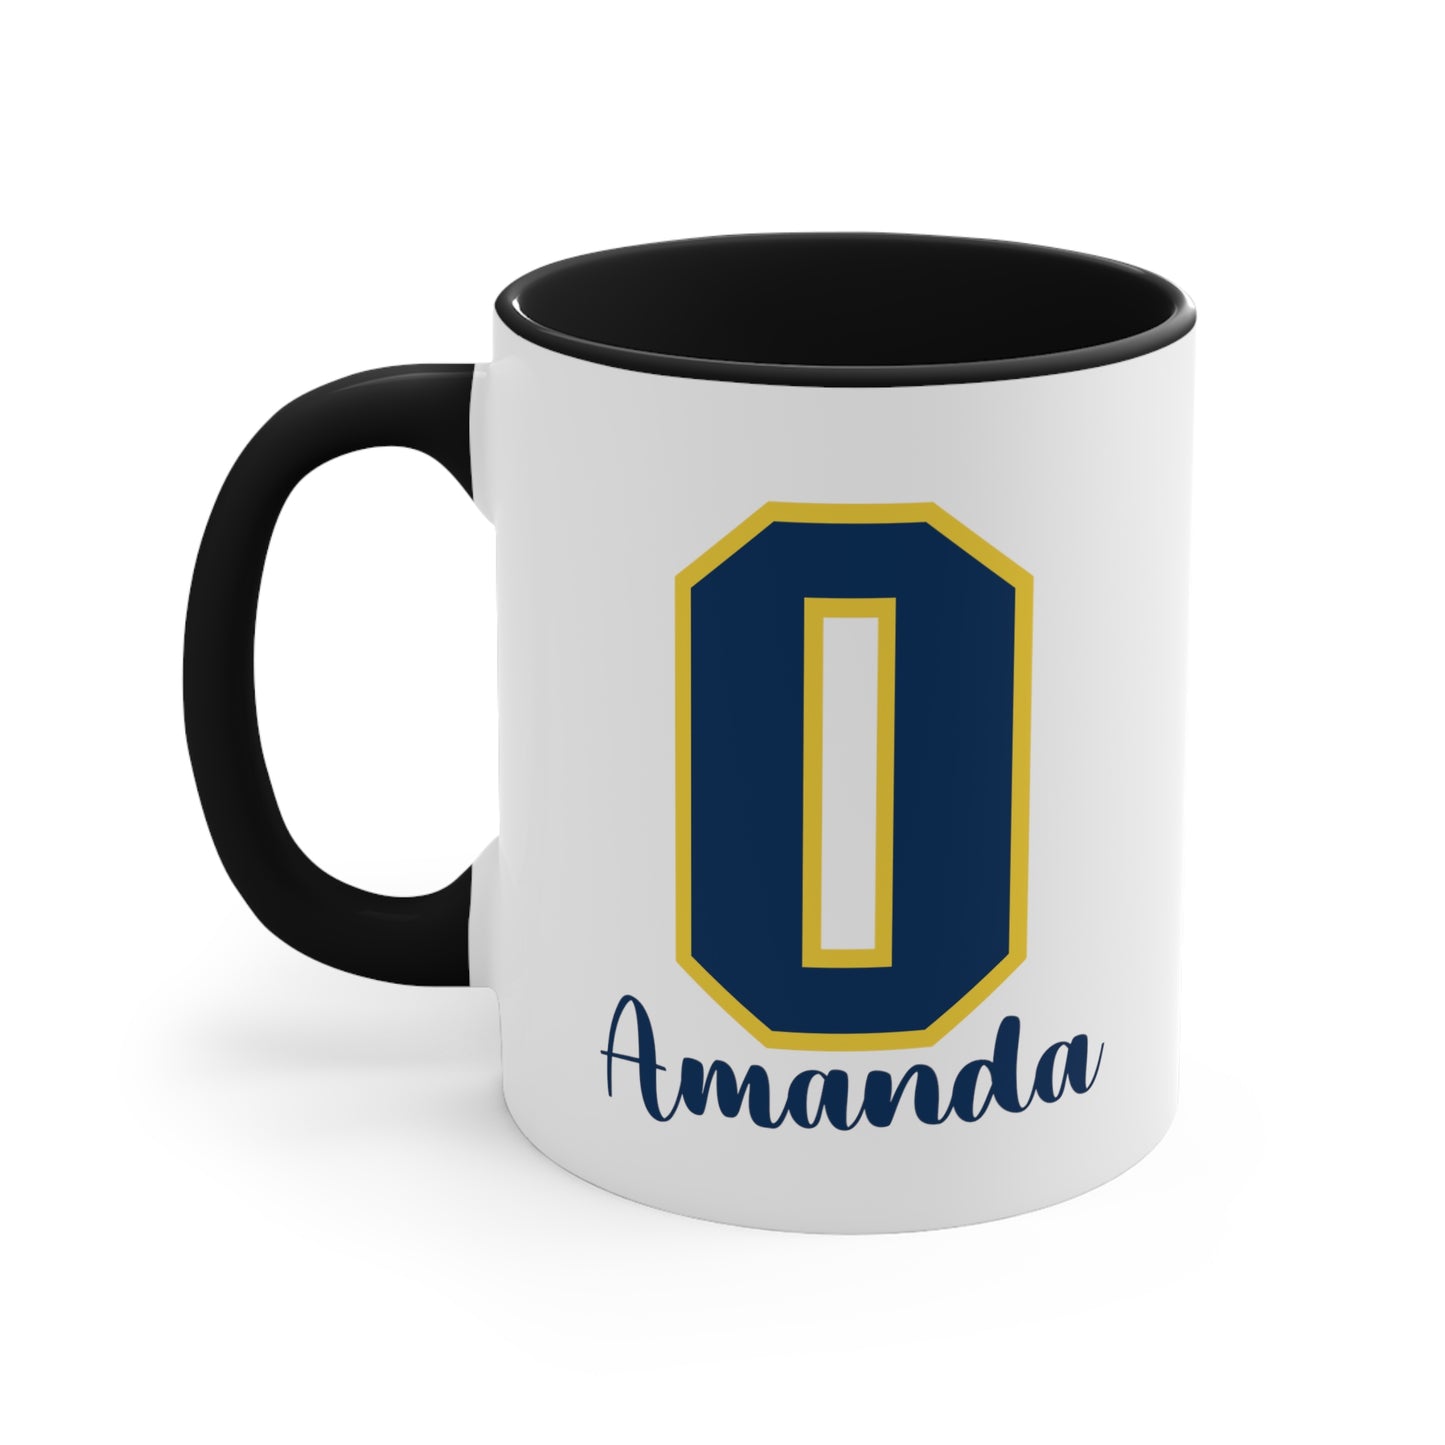 Family Edition! Personalized Oxford Pick-Your-Sport Coffee Mug